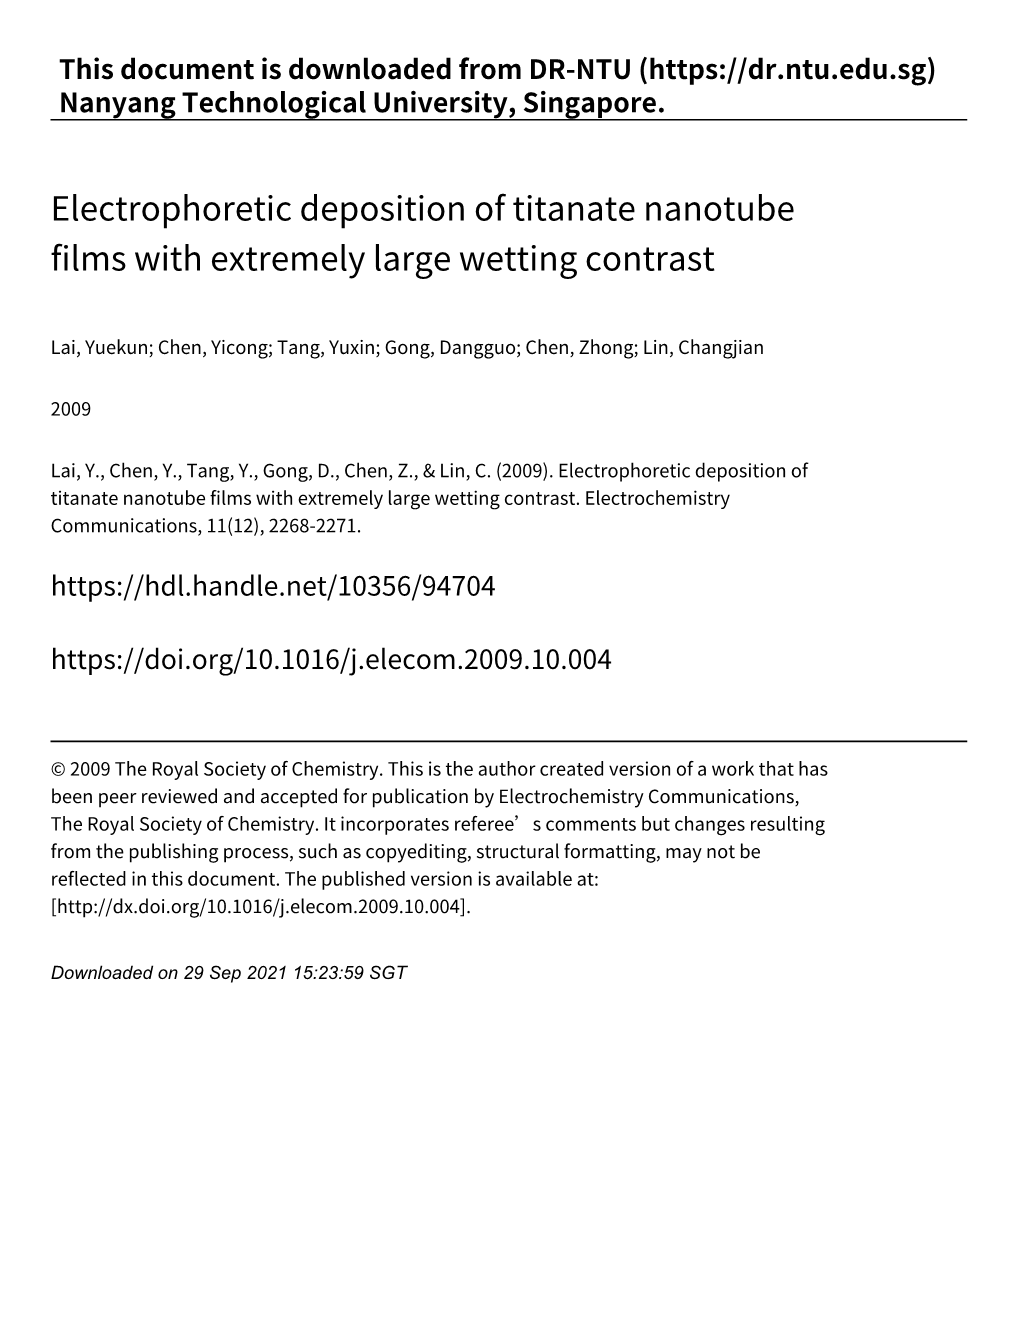 Electrophoretic Deposition of Titanate Nanotube Films with Extremely Large Wetting Contrast